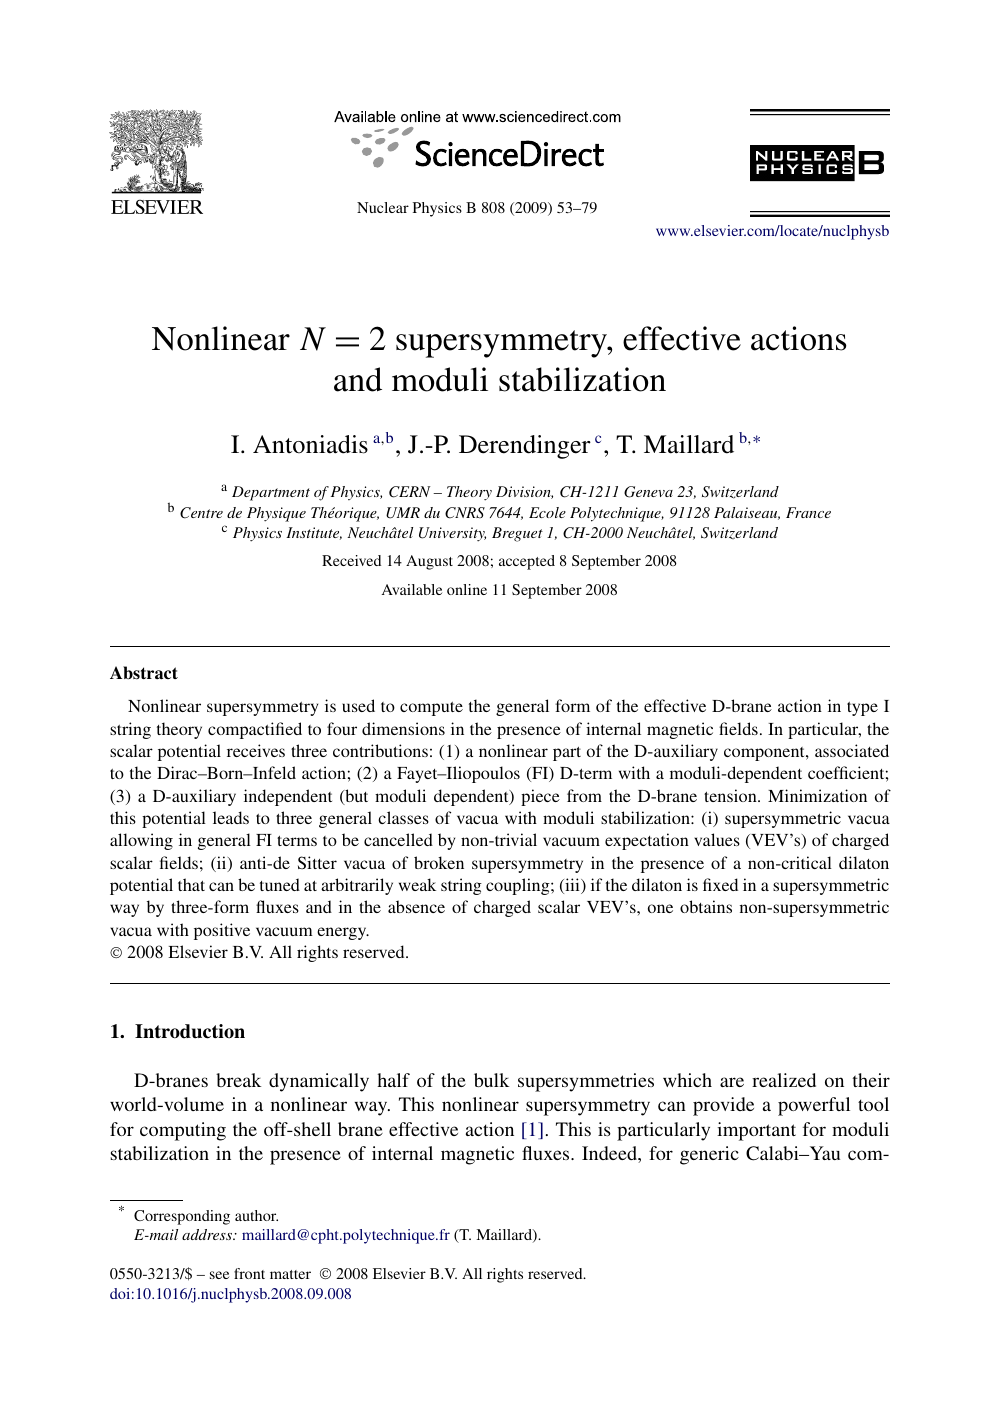 Nonlinear Supersymmetry Effective Actions And Moduli Stabilization Topic Of Research Paper In Physical Sciences Download Scholarly Article Pdf And Read For Free On Cyberleninka Open Science Hub